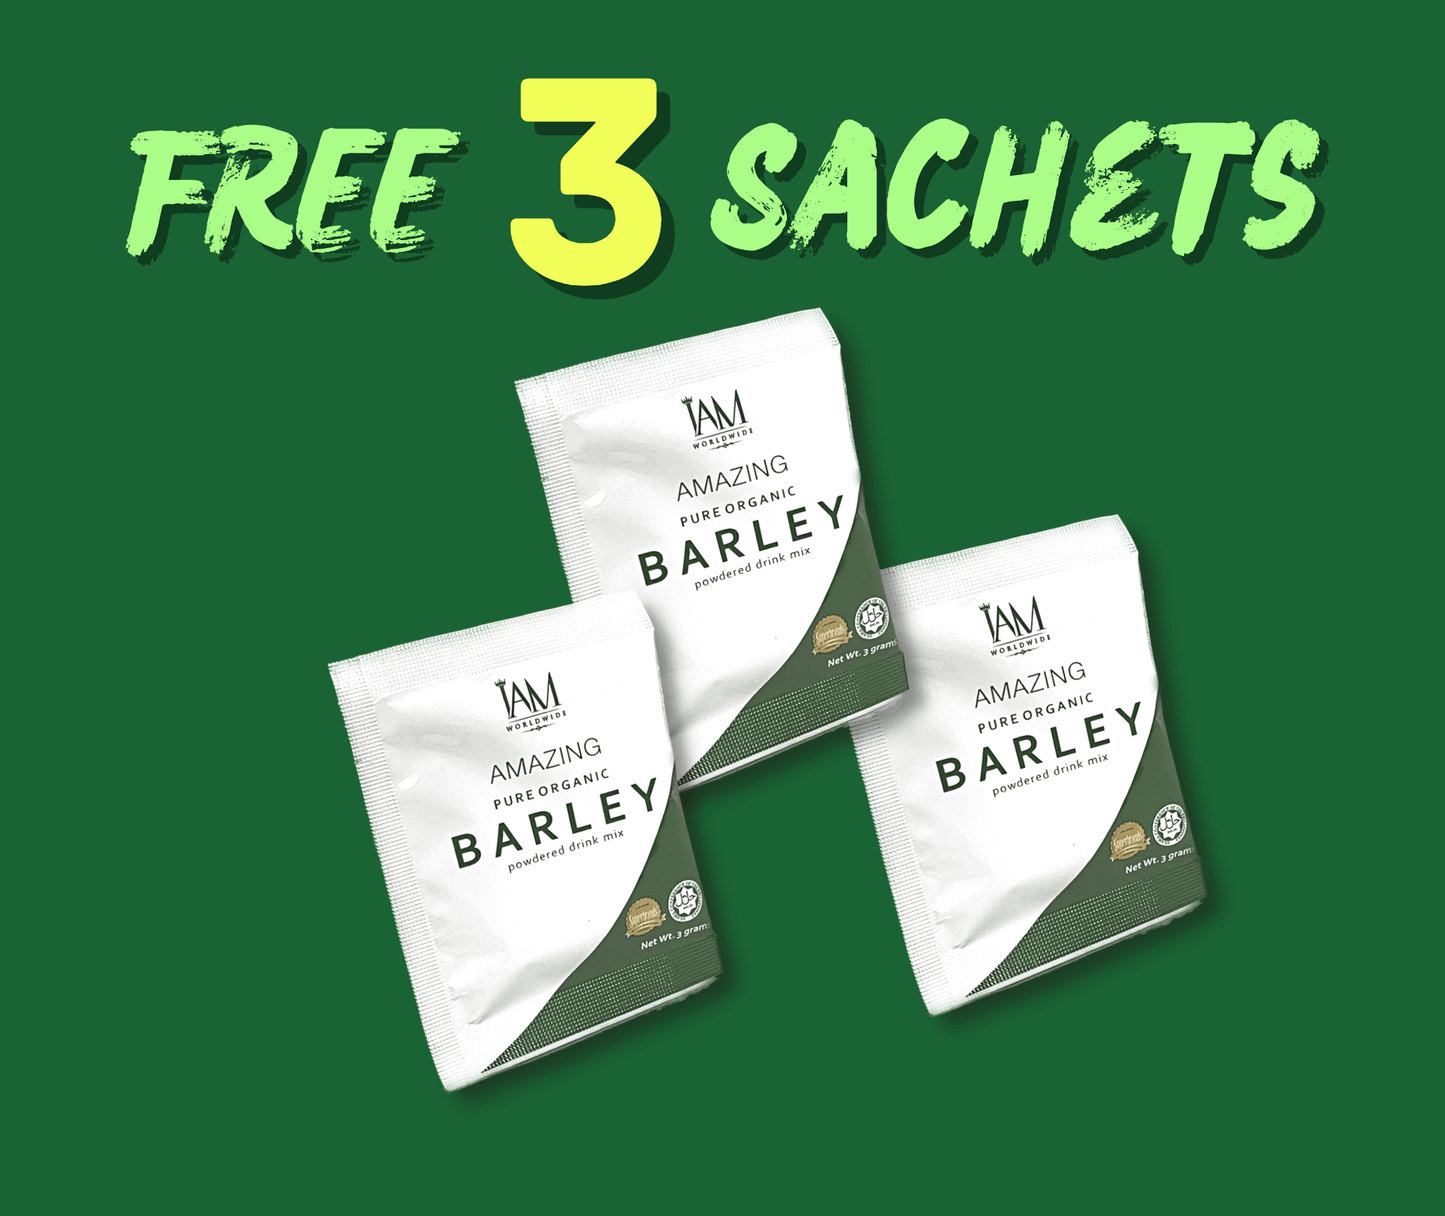 BARLEY FAMILY PACK - Buy 3 BOXES Get 3 Sachets for Free